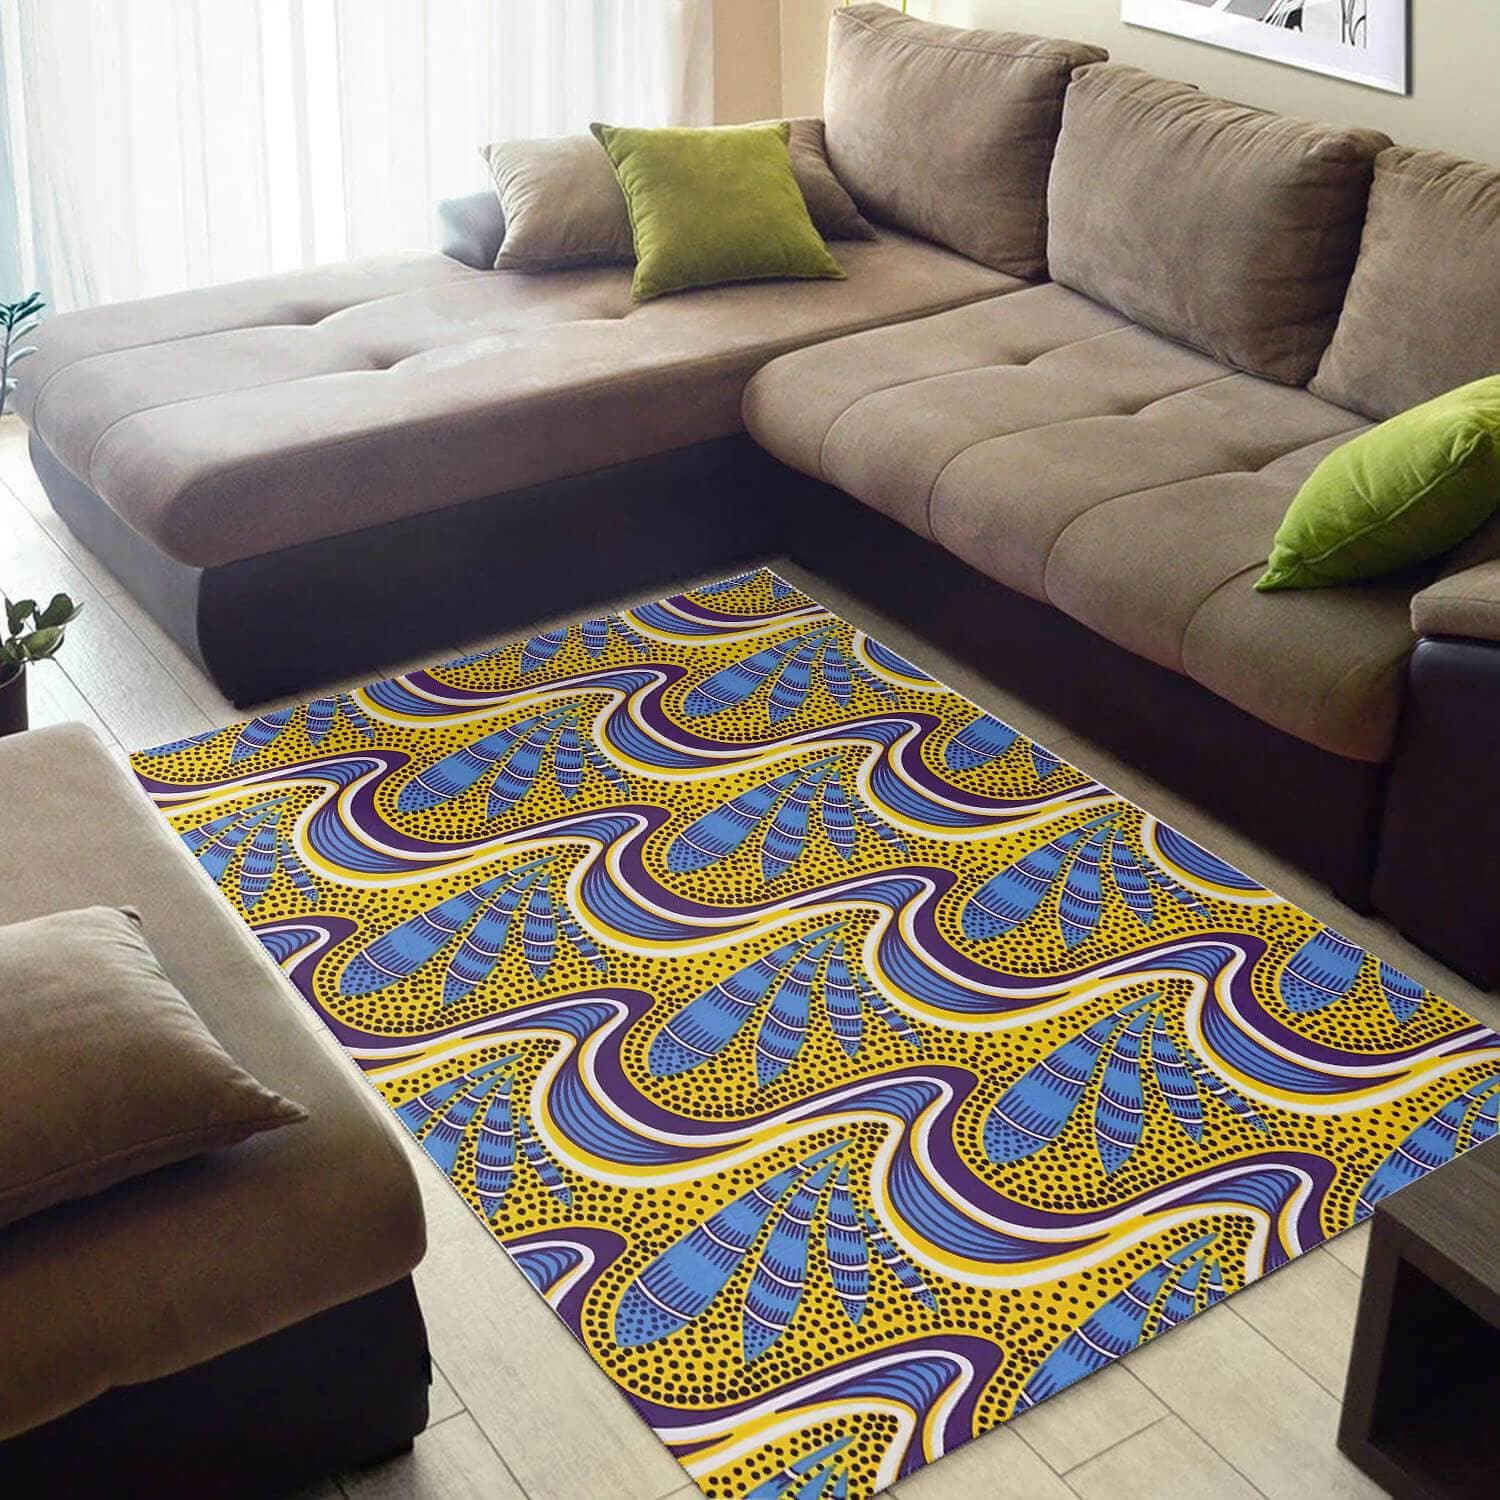 Modern African American Beautiful Black History Month Afrocentric Pattern Art Design Floor Themed Home Rug